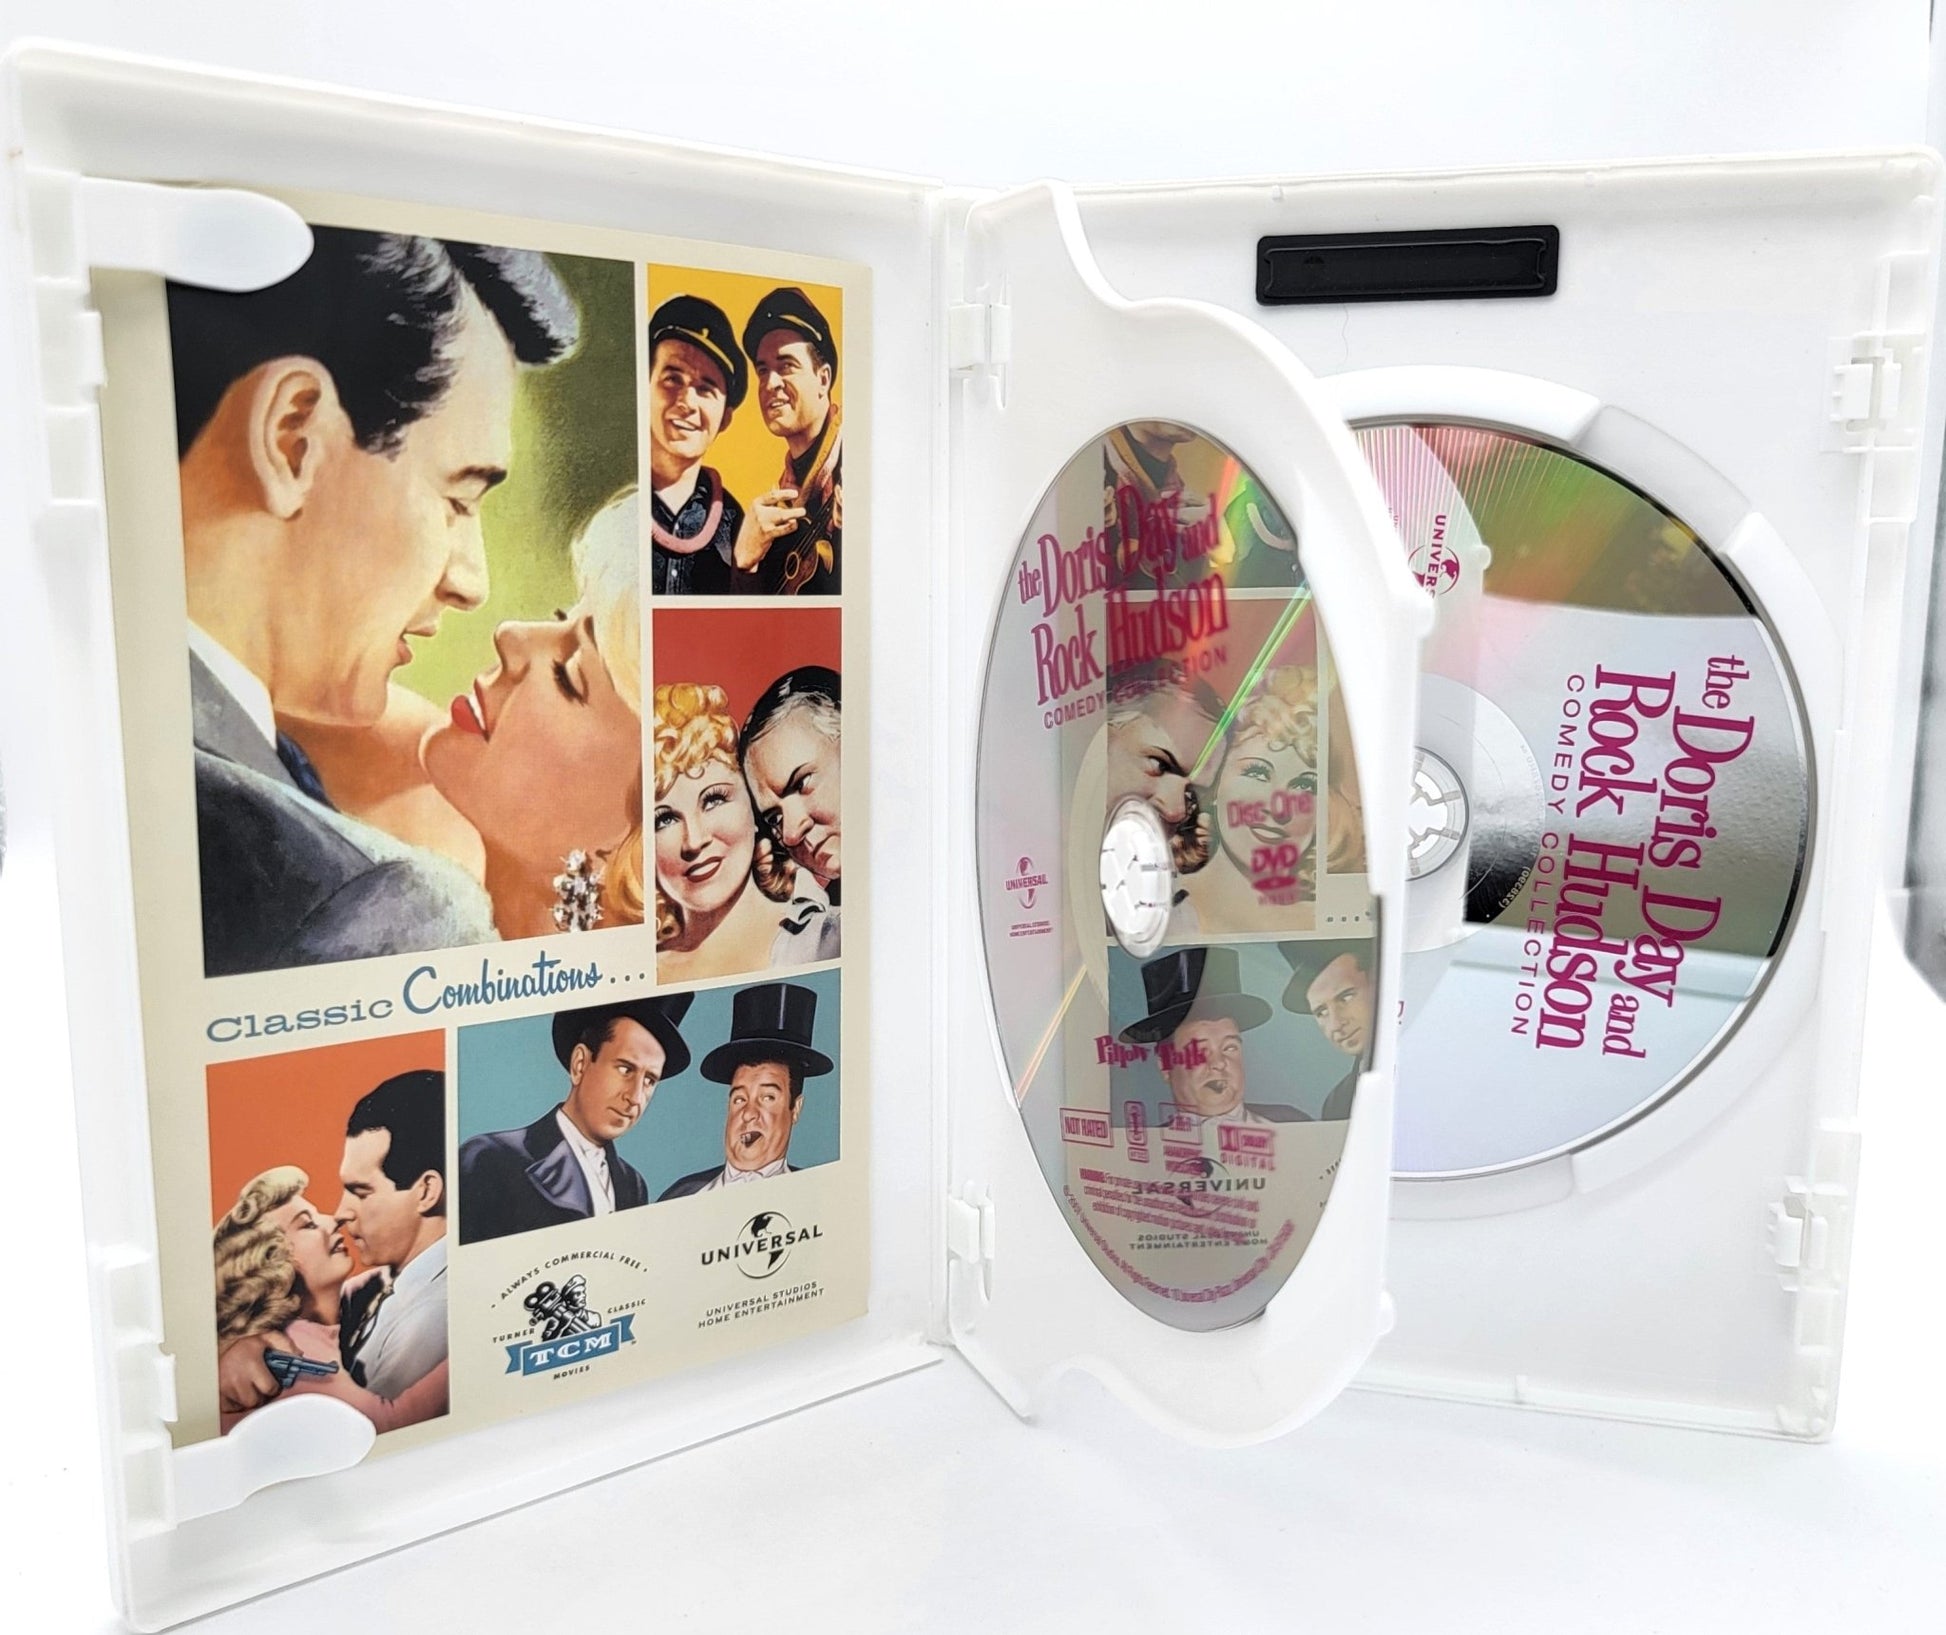 Universal Studios Home Entertainment - The Doris Day and Rock Hudson | DVD | Comedy Collection - DVD - Steady Bunny Shop